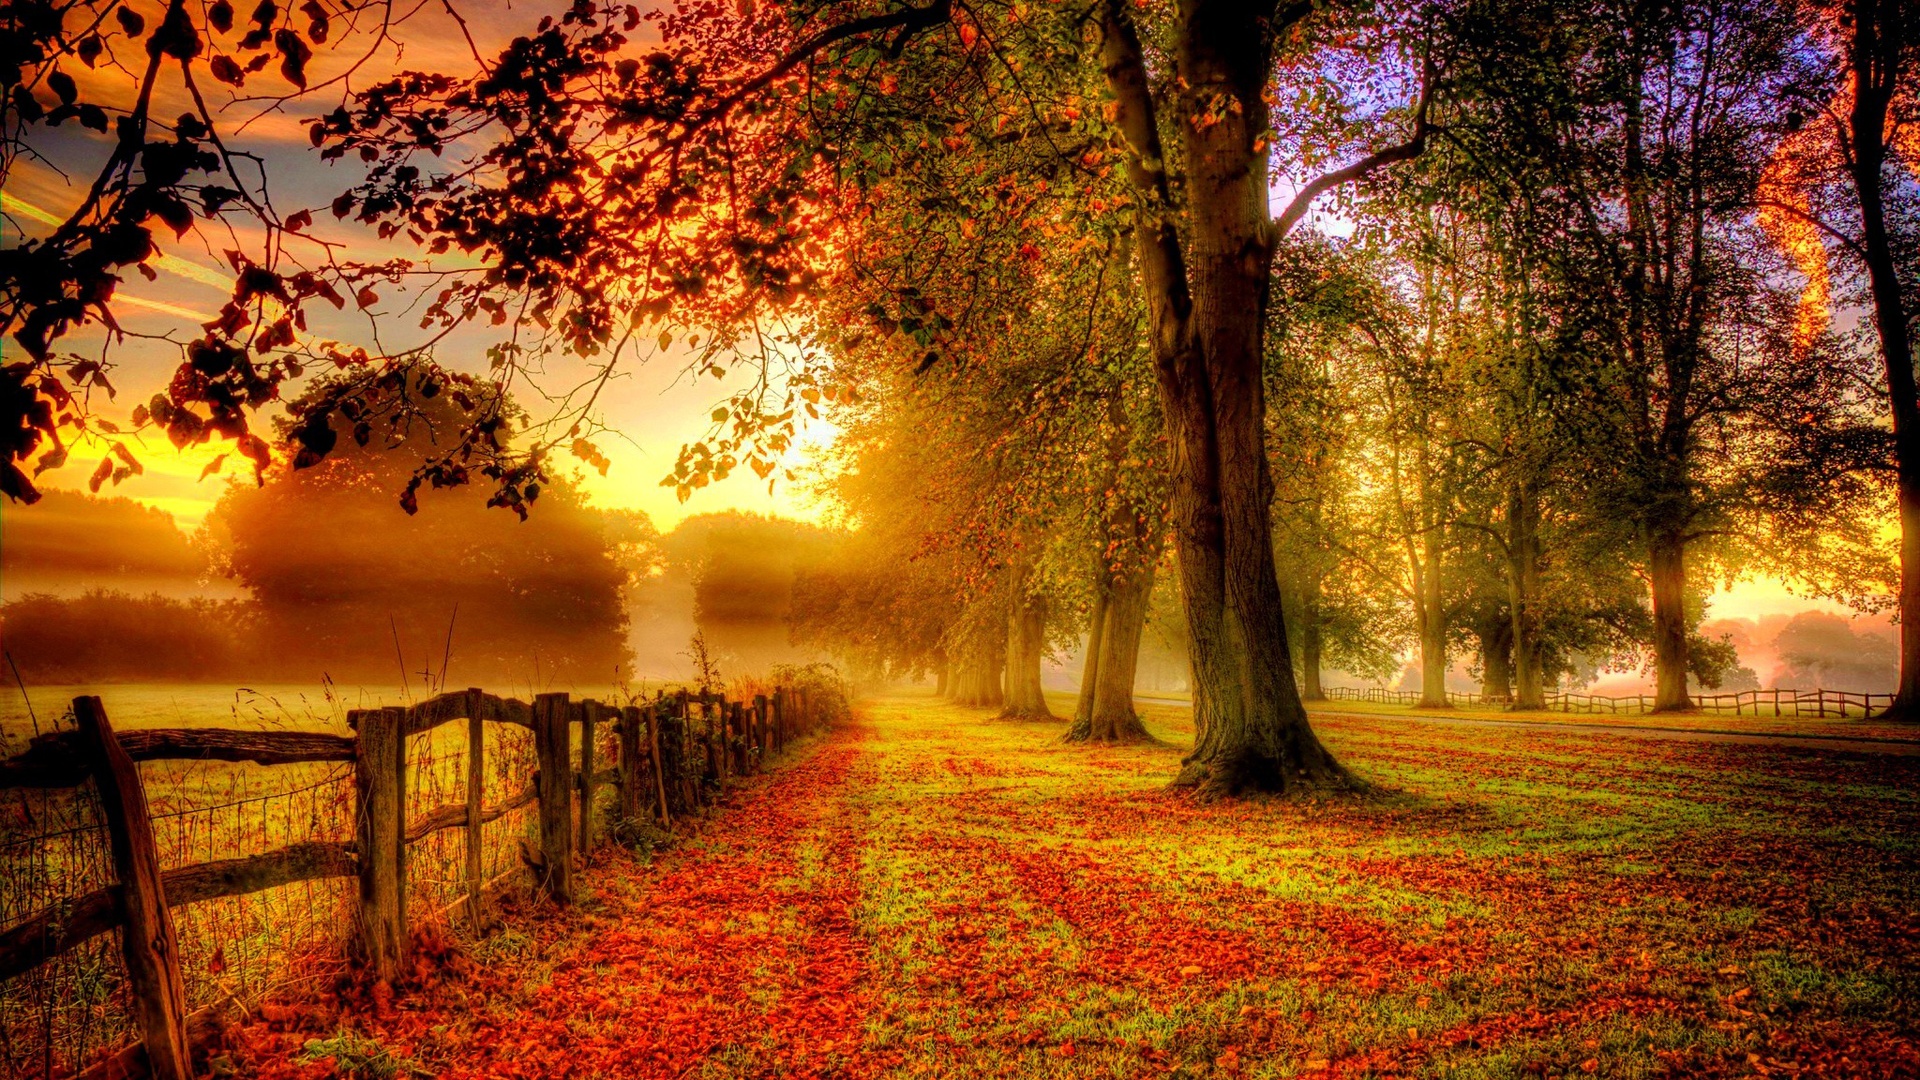 photography, hdr, fence, fall wallpaper for mobile